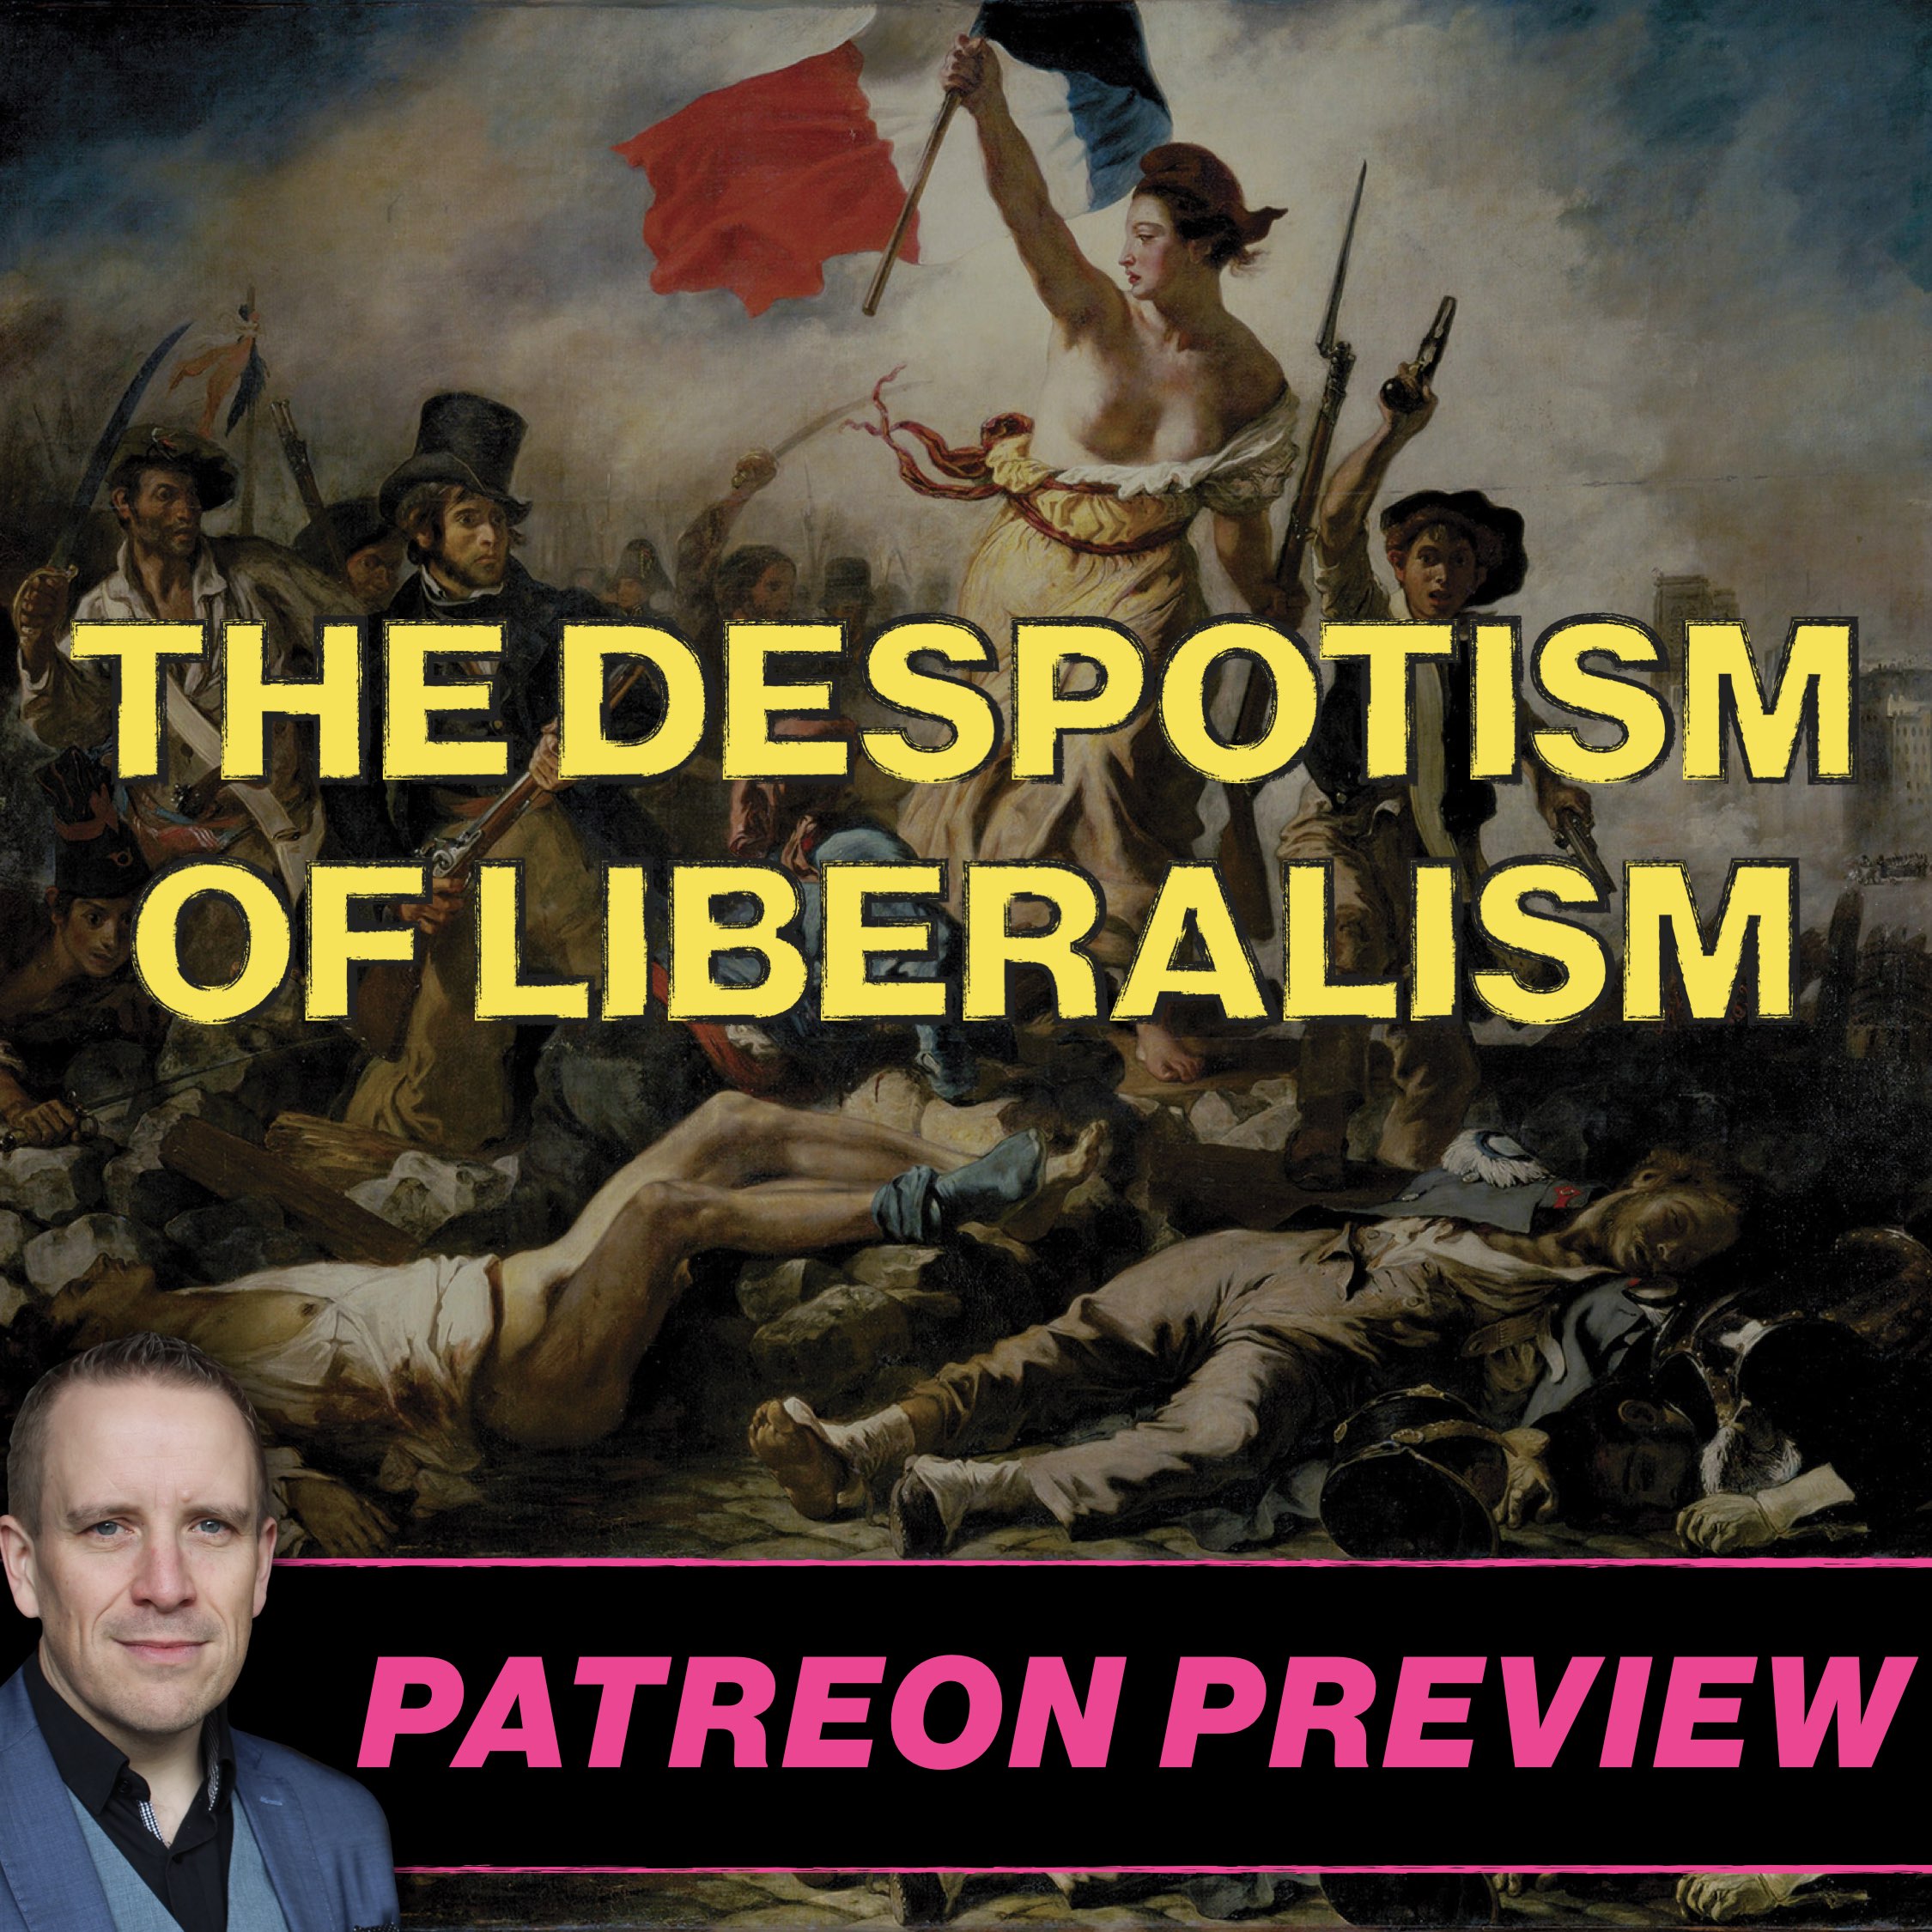 The Despotism of Classical Liberalism (Patreon Preview)